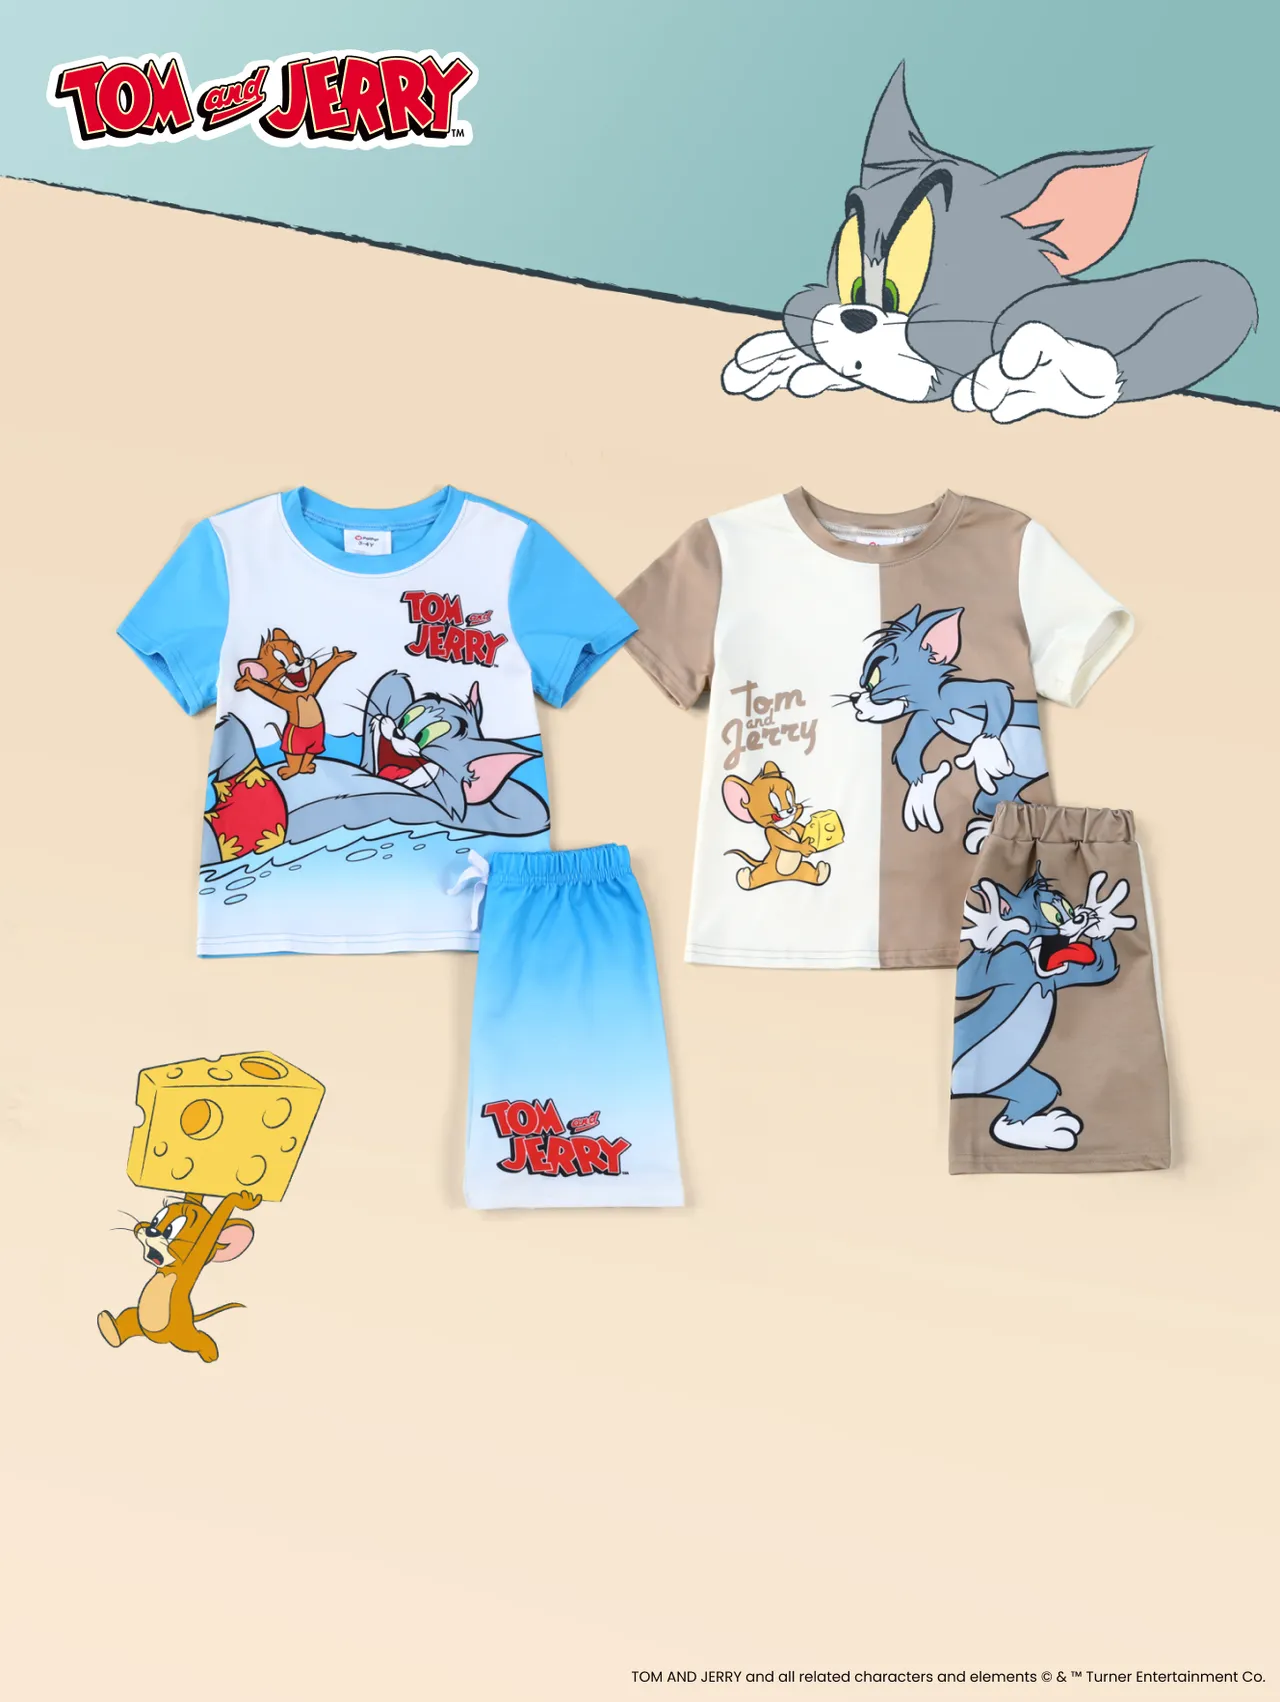 Click it to join Adventure Ready with Tom and Jerry activity